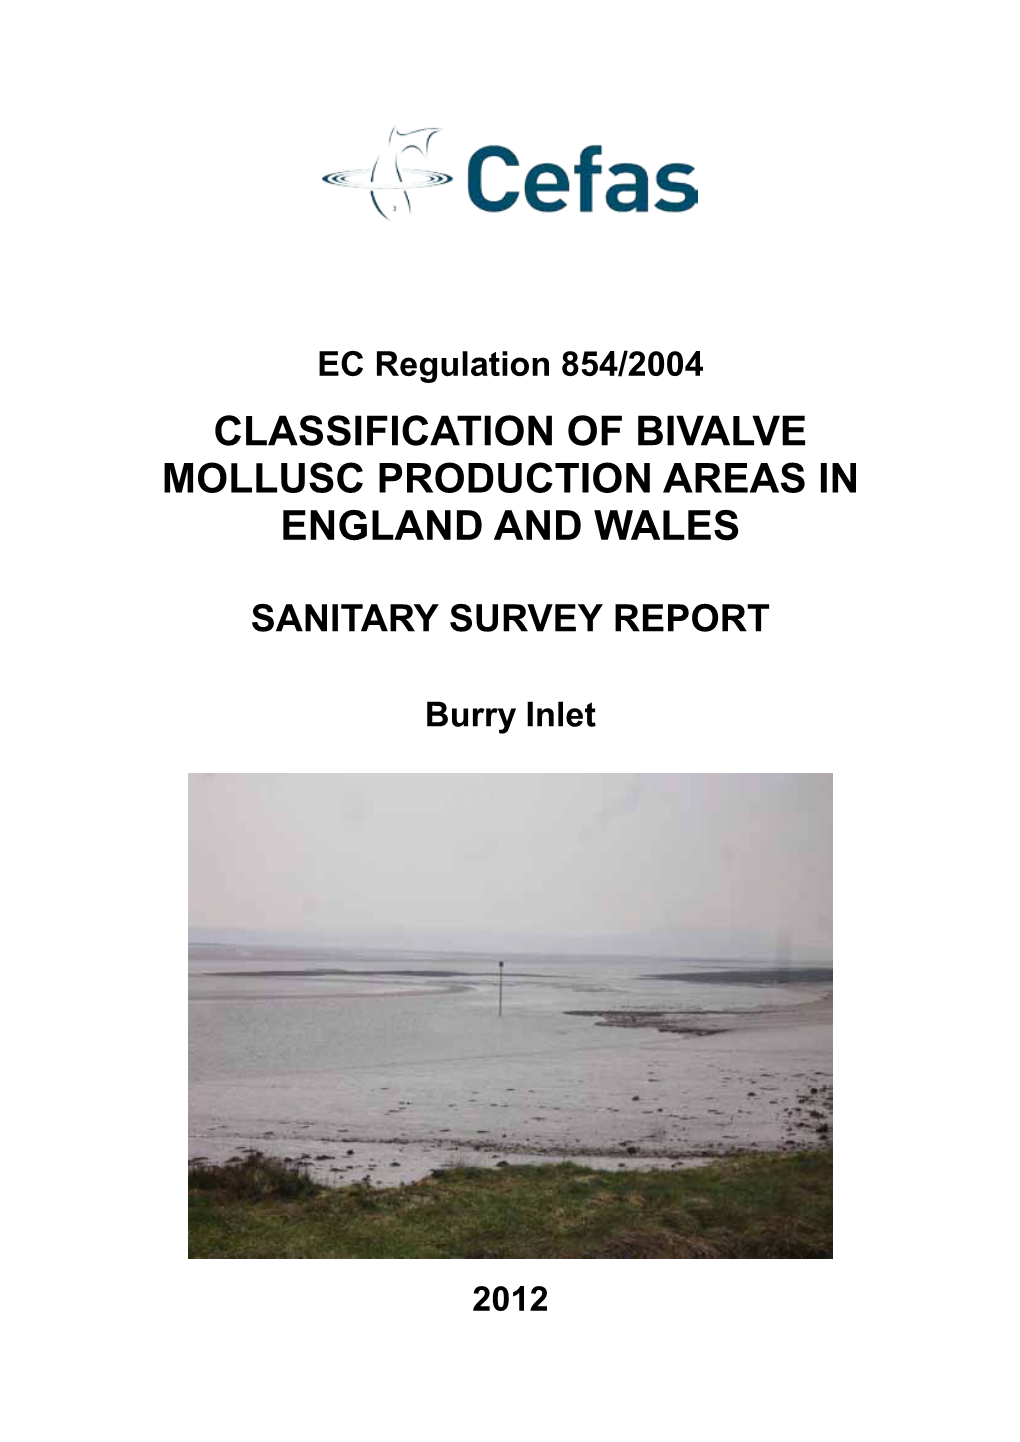 Classification of Bivalve Mollusc Production Areas in England and Wales